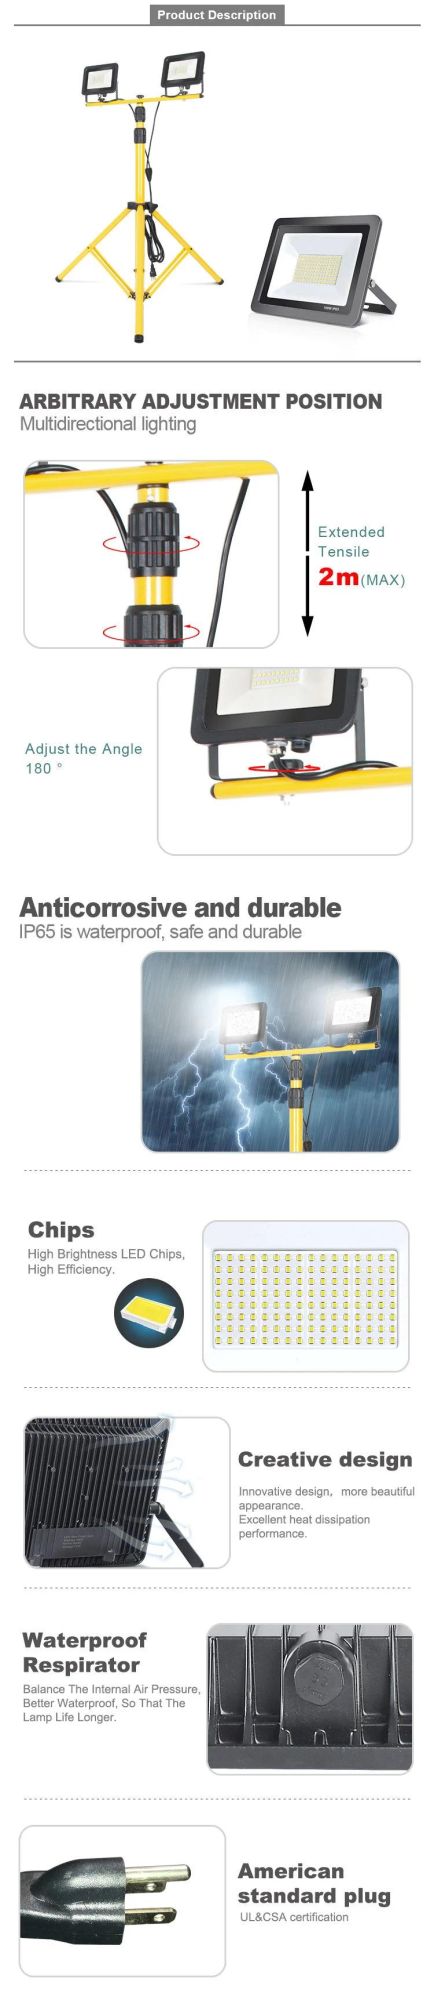 IP65 Water Proof Outdoor 2 Heads 40W 3200lm Foldable LED Emergency Work Flood Light Lamp with Telescopic Tripod